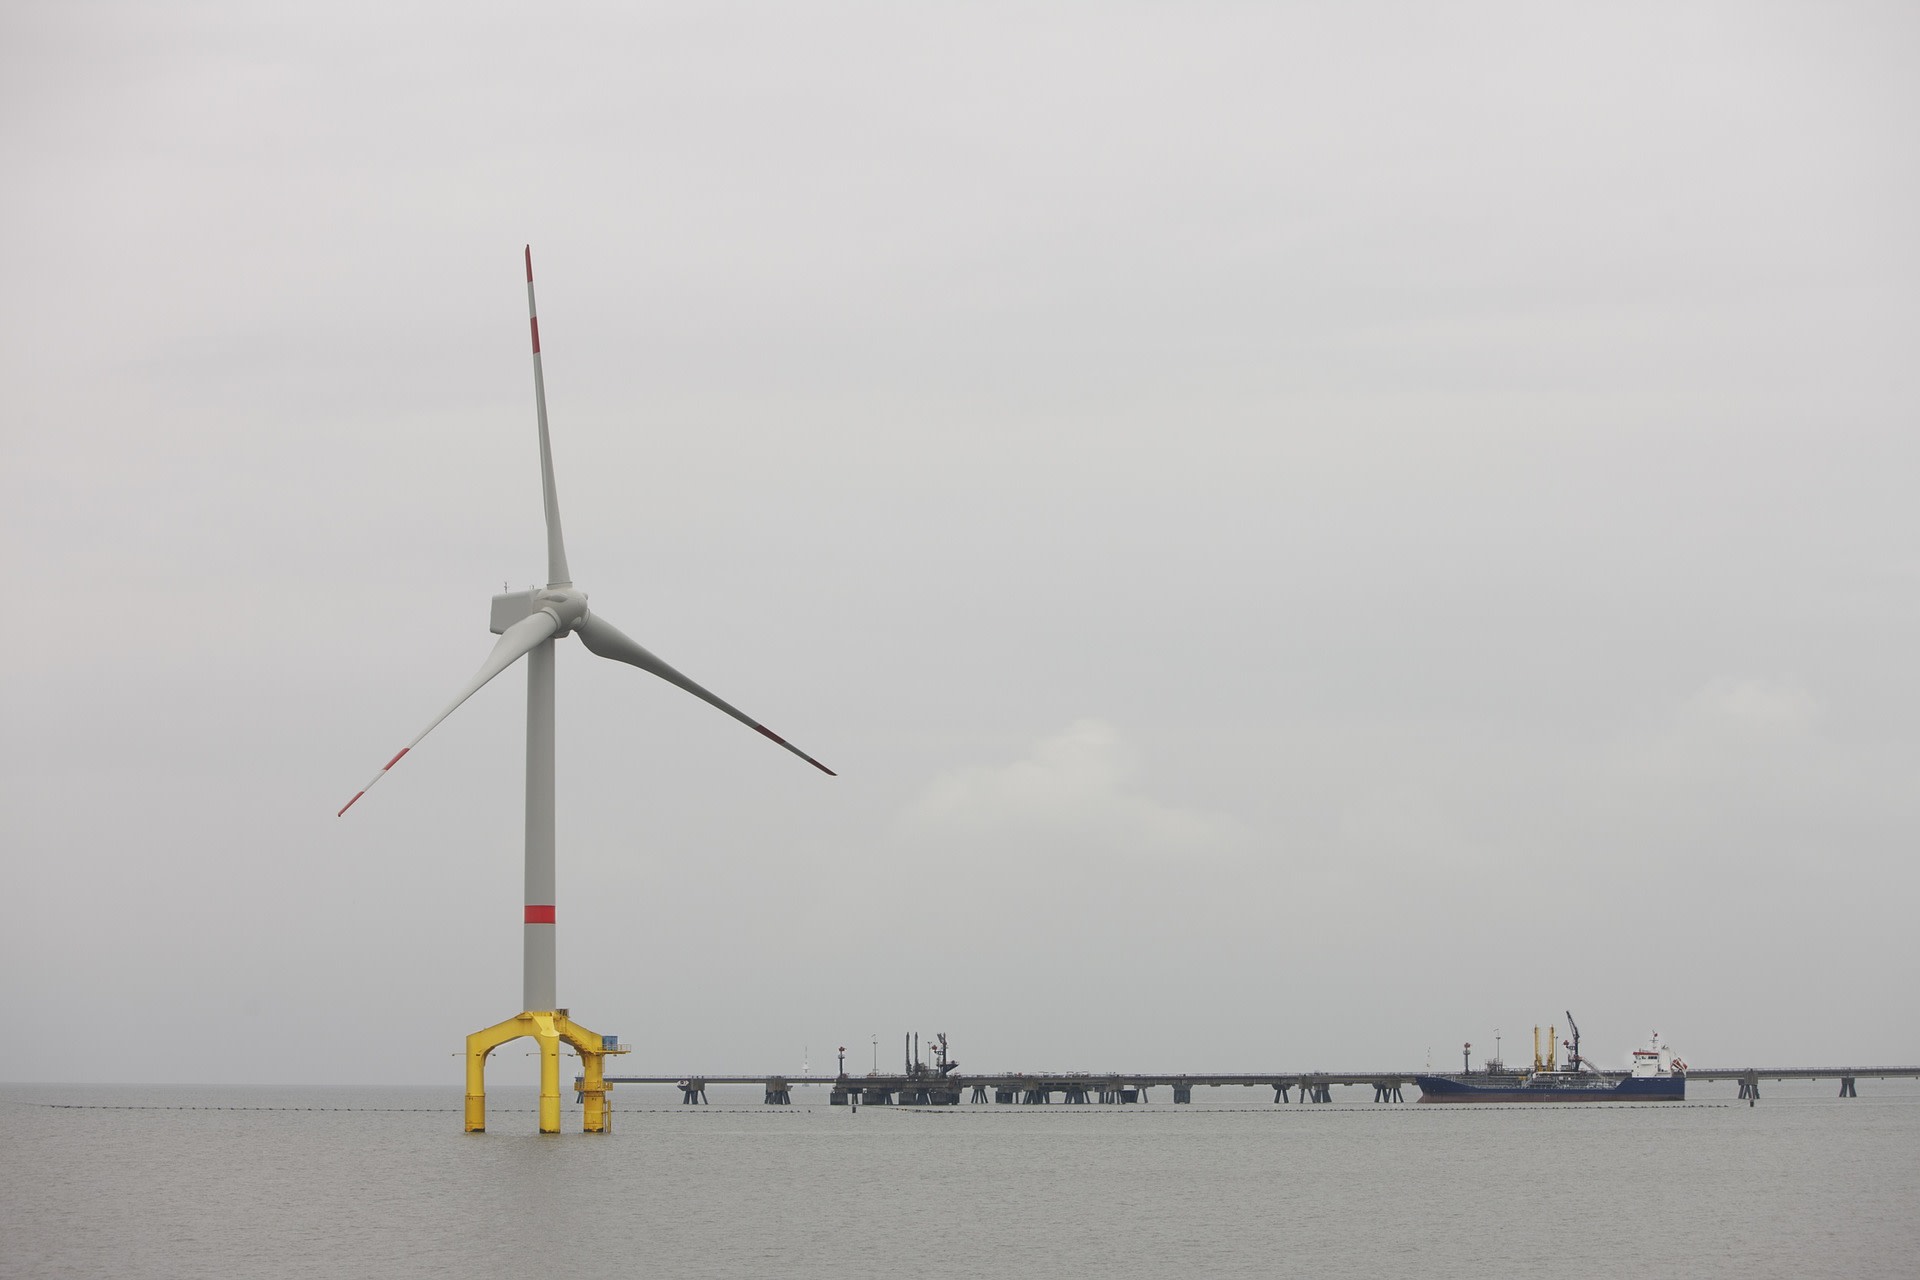 Vestas Sells Converters and Controls Business to KK Wind Solutions to Boost Wind Energy Supply Chain